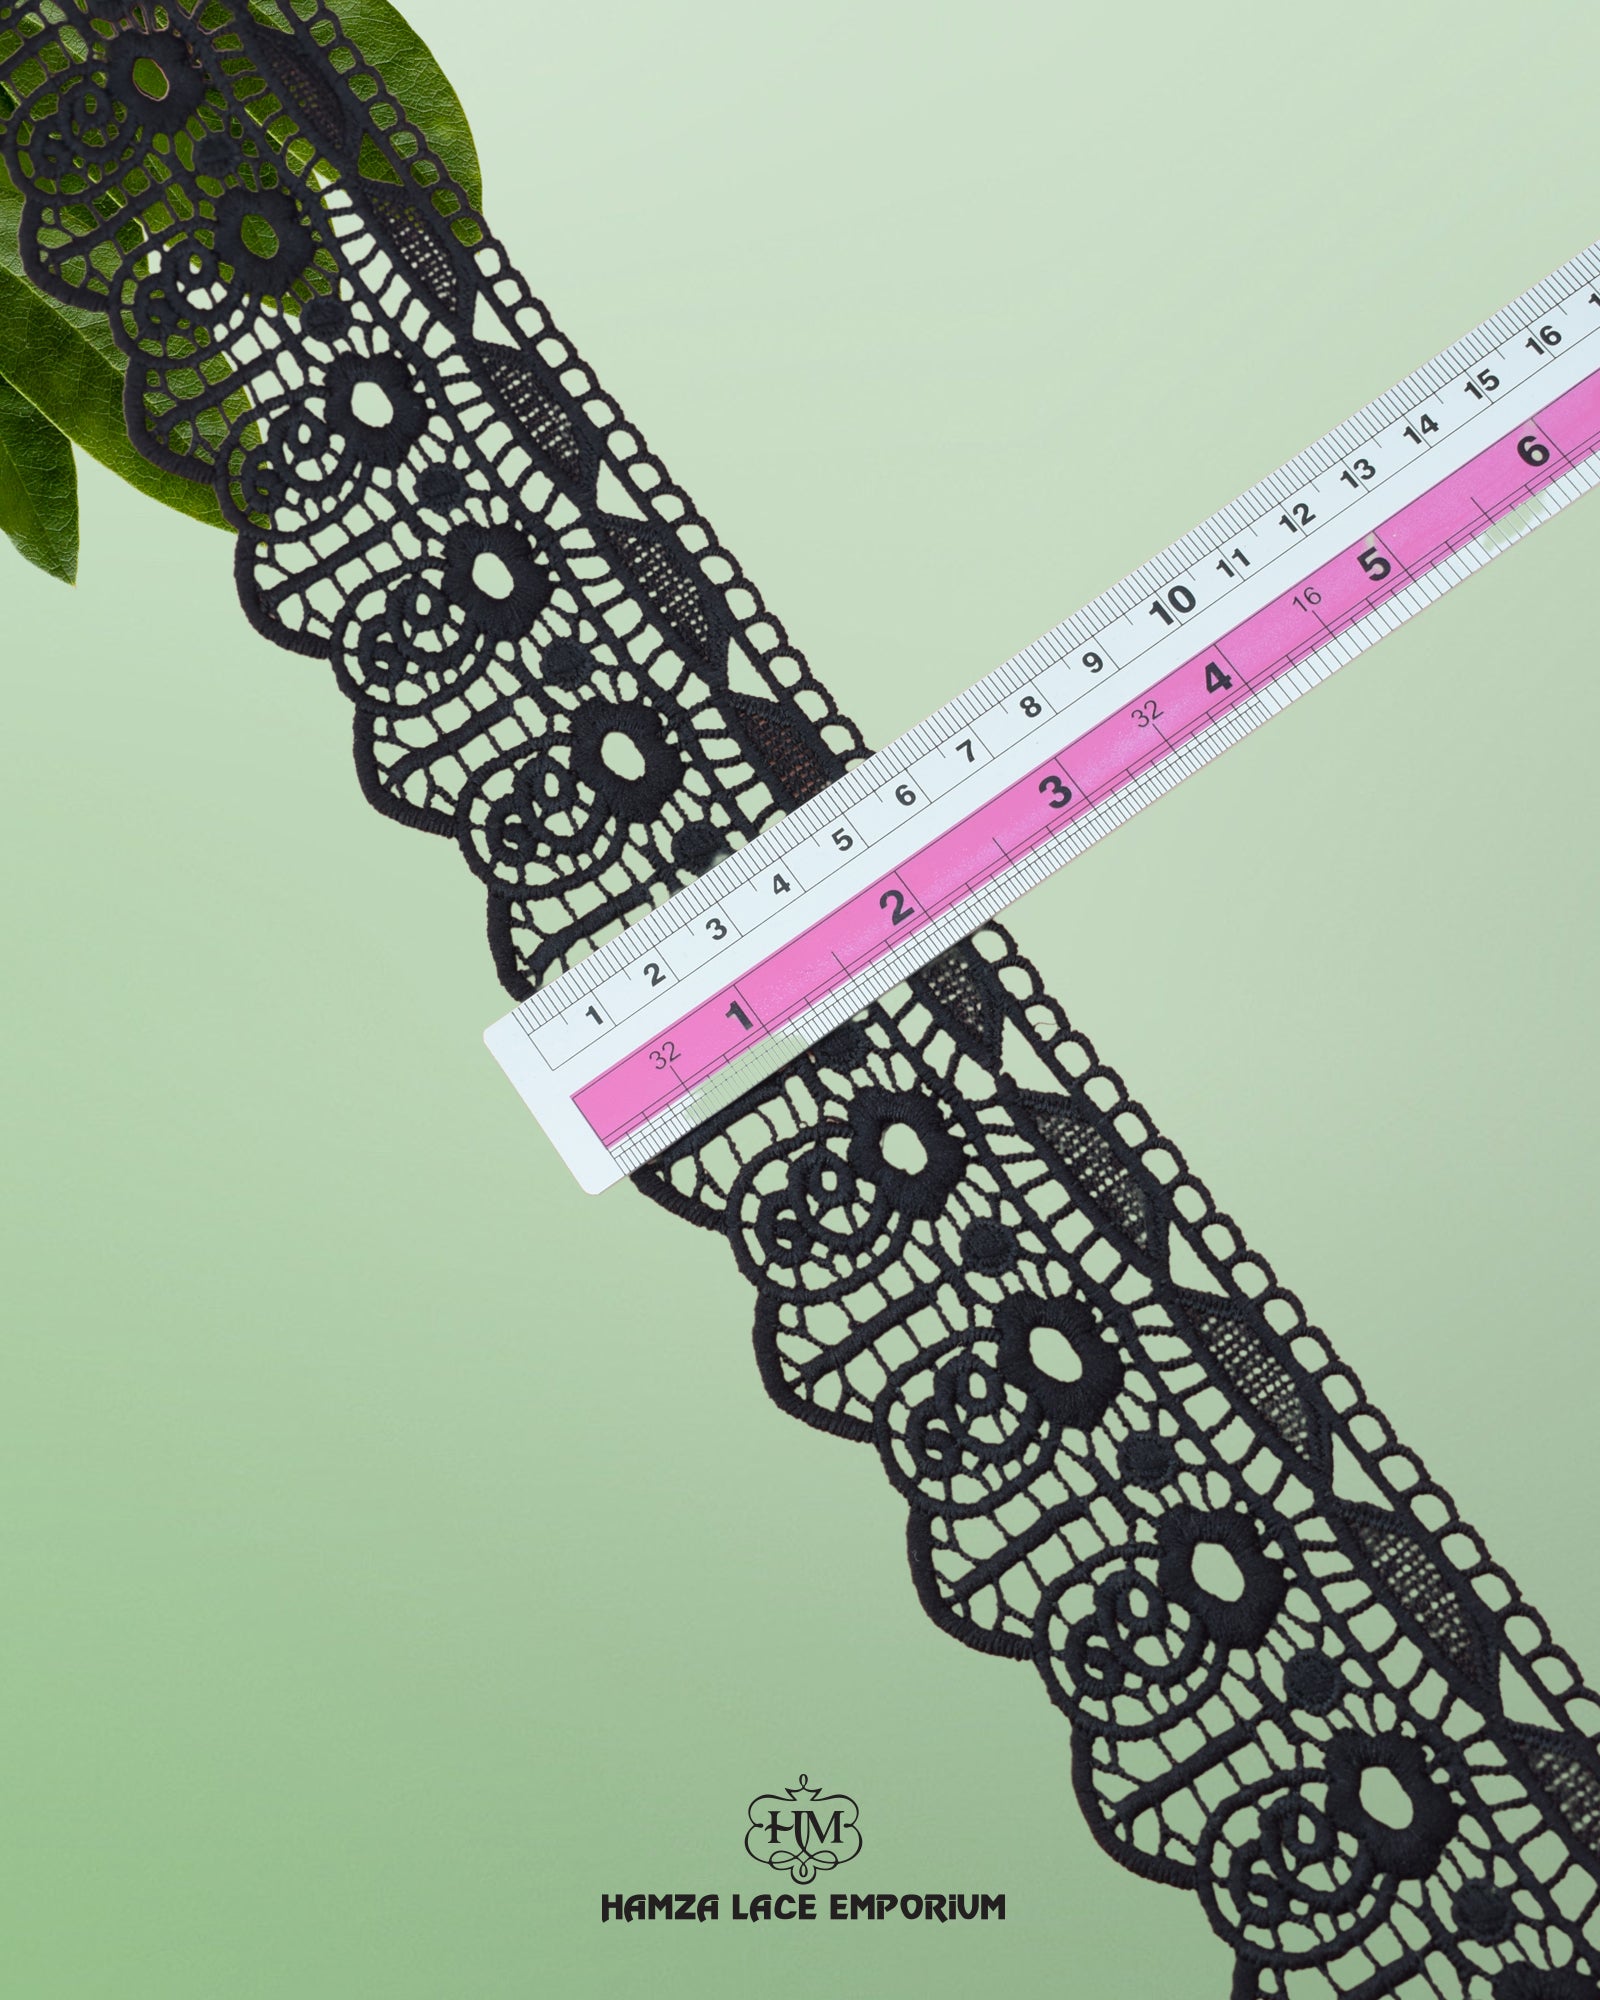 Size of the 'Edging Loop Lace 23415' is shown as '2.25' inches with the help of a ruler